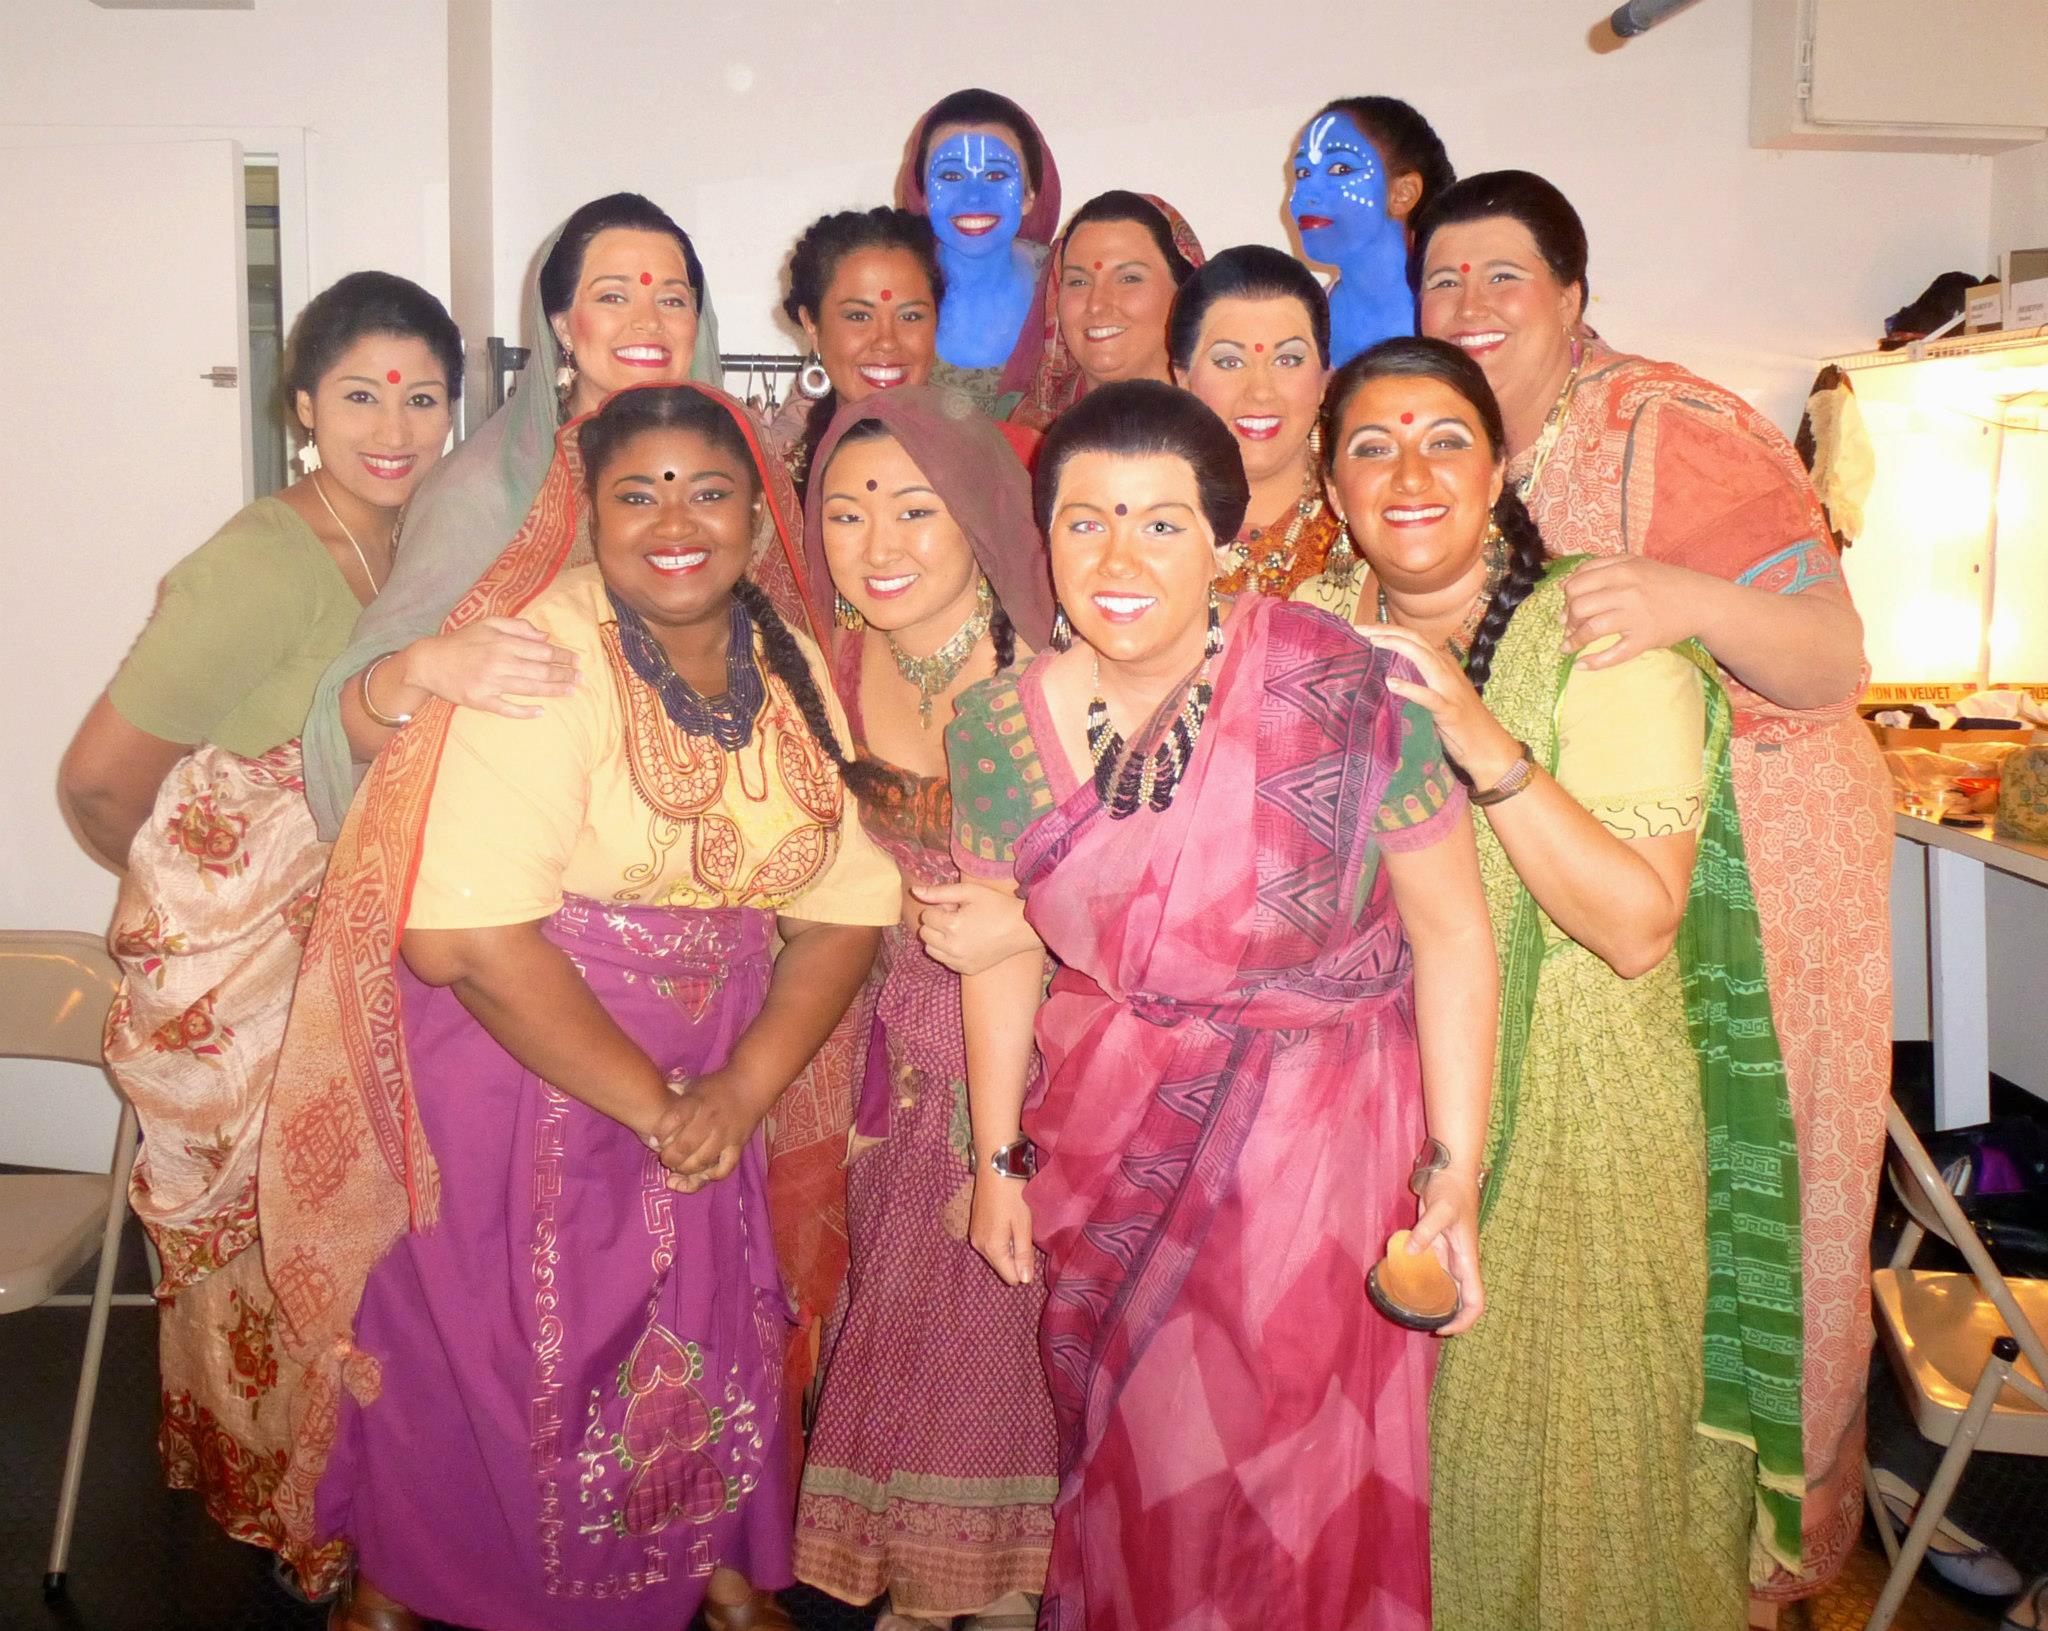 The Ladies of Pearl Fishers